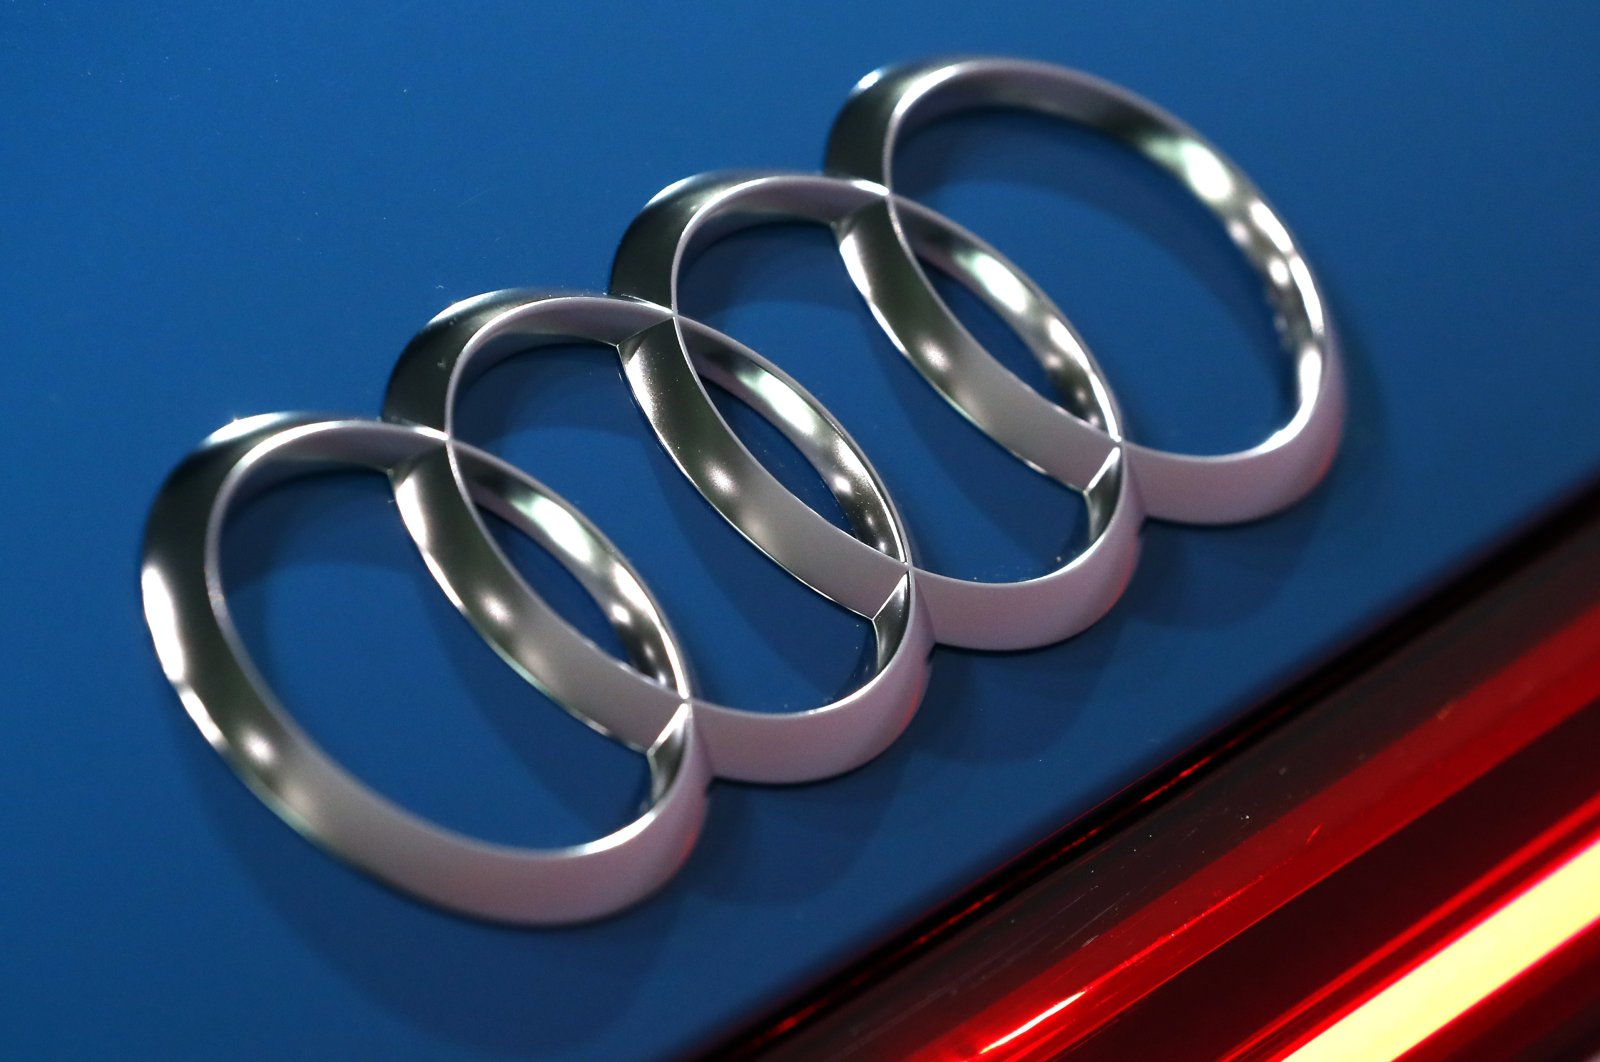 The Audi logo is seen on an Audi e-tron vehicle in Ingolstadt, Germany, March 14, 2019. (AP Photo)